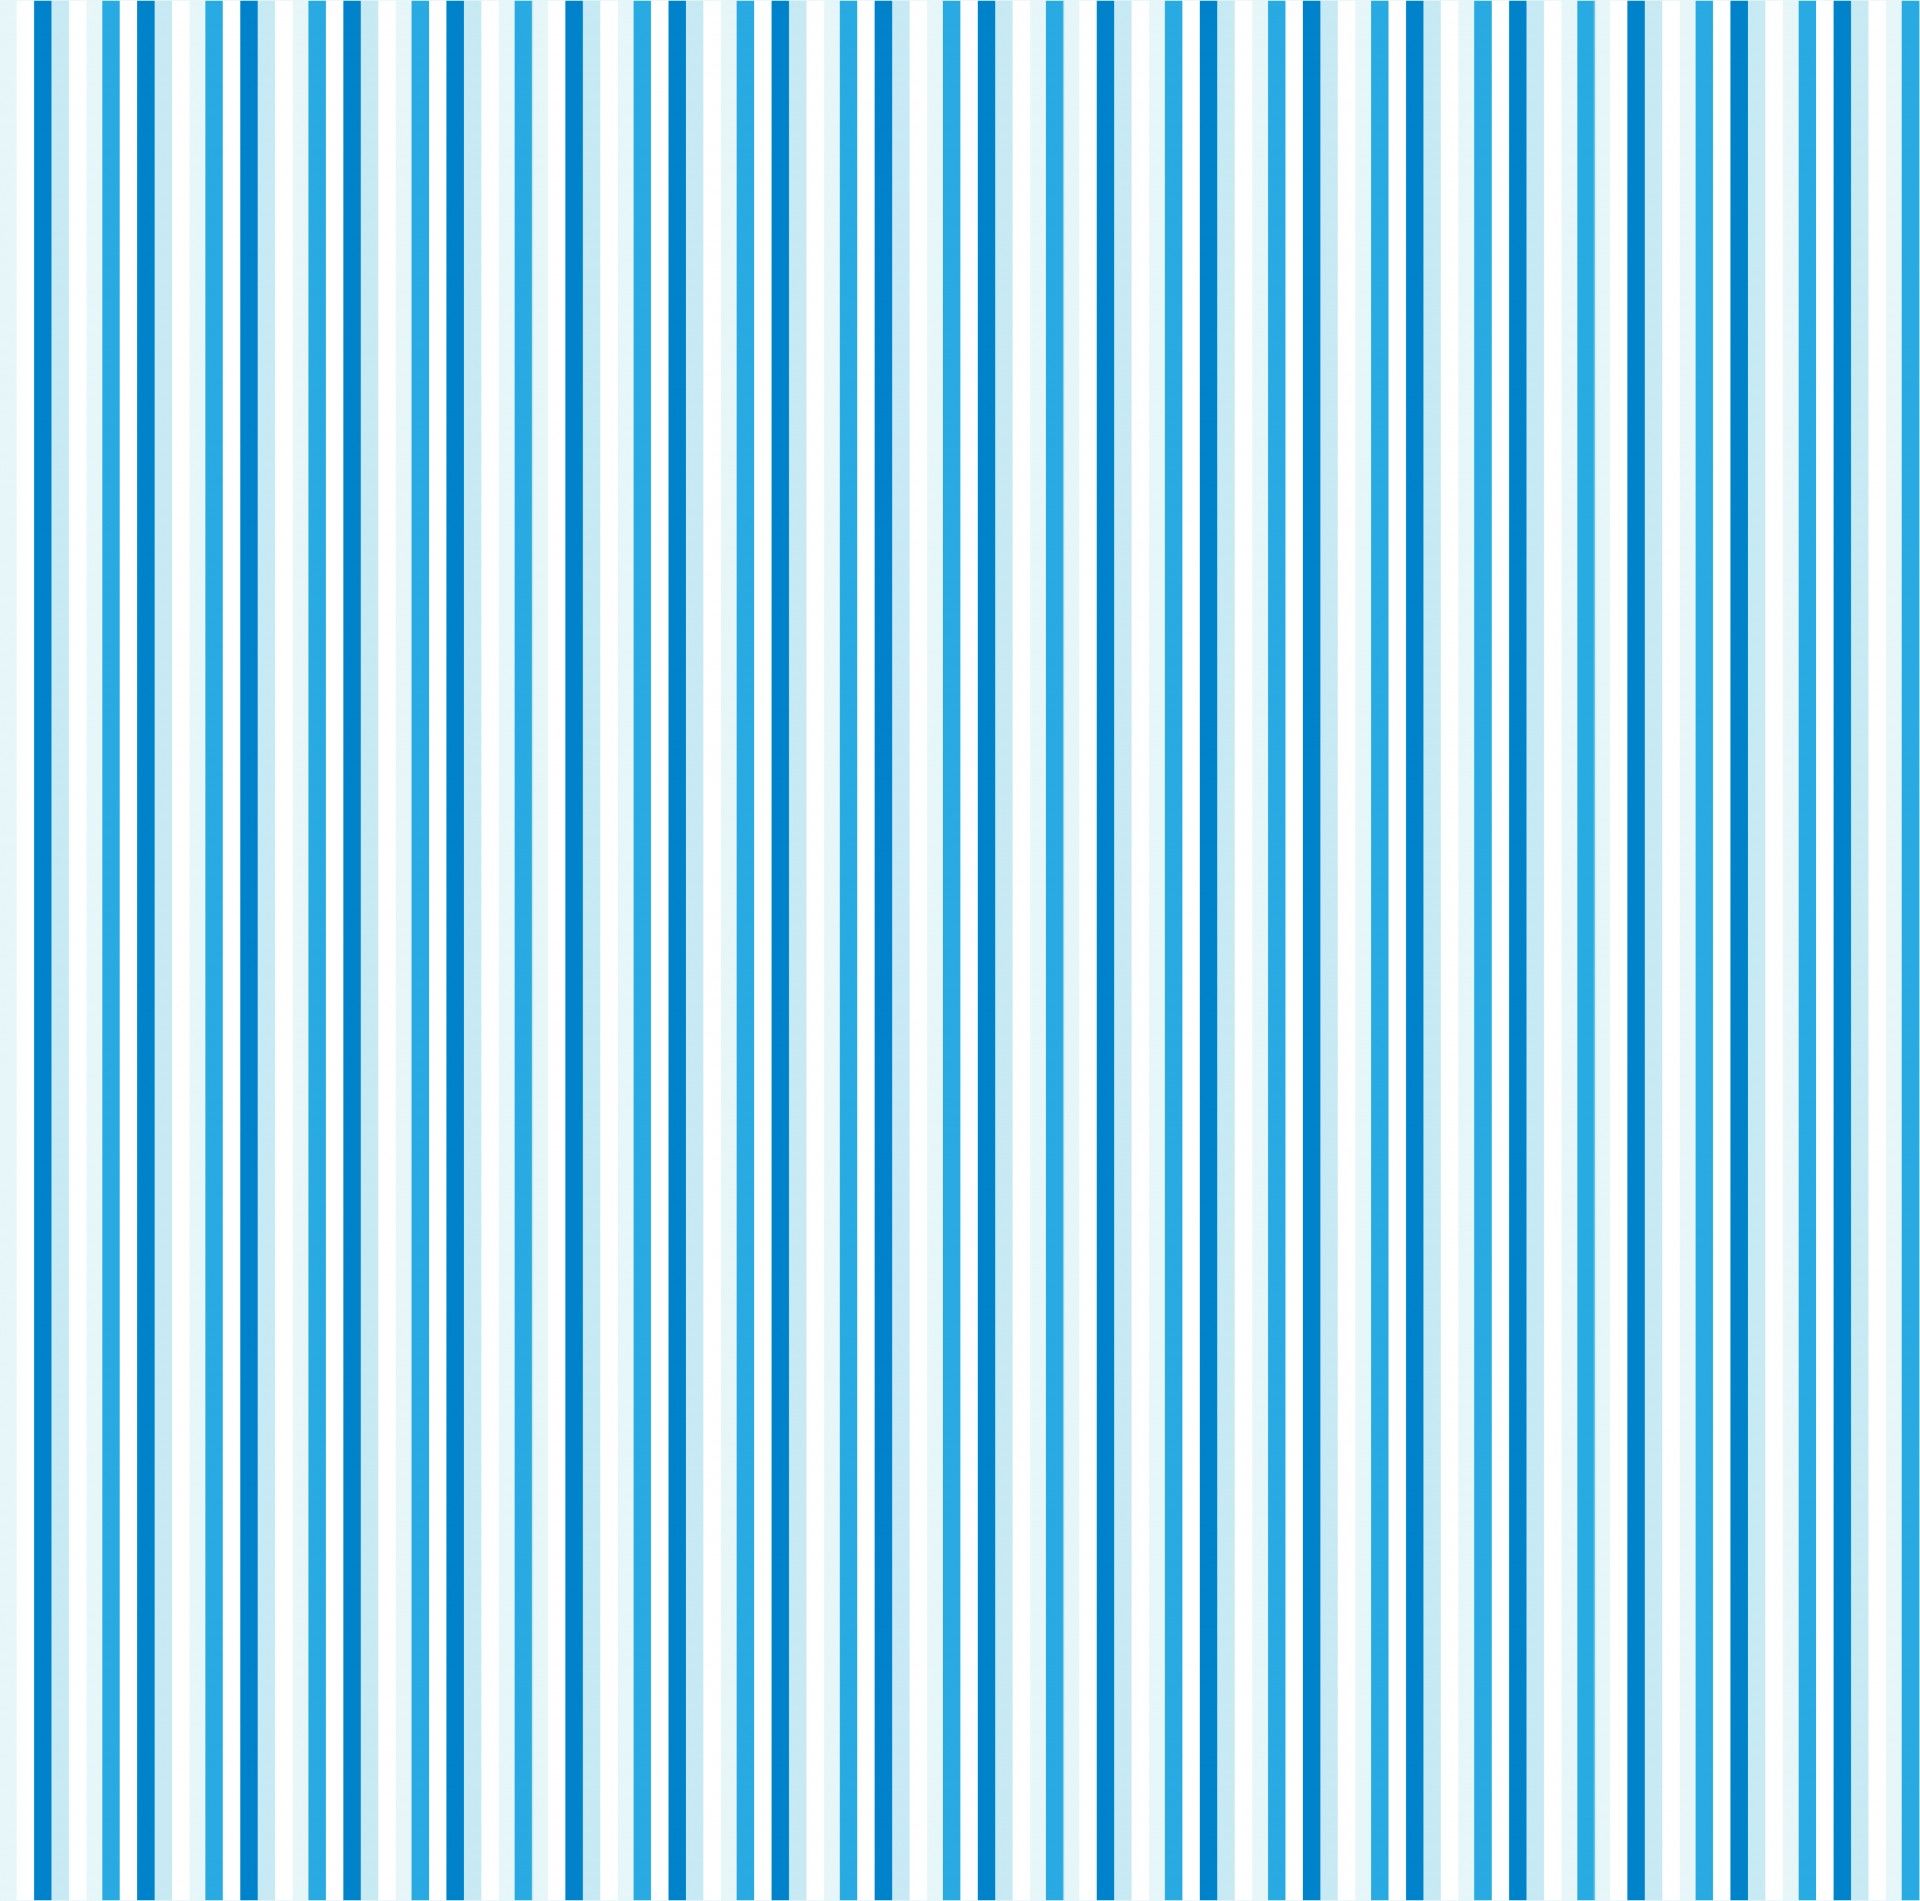 Striped Background Background for Free PowerPoint